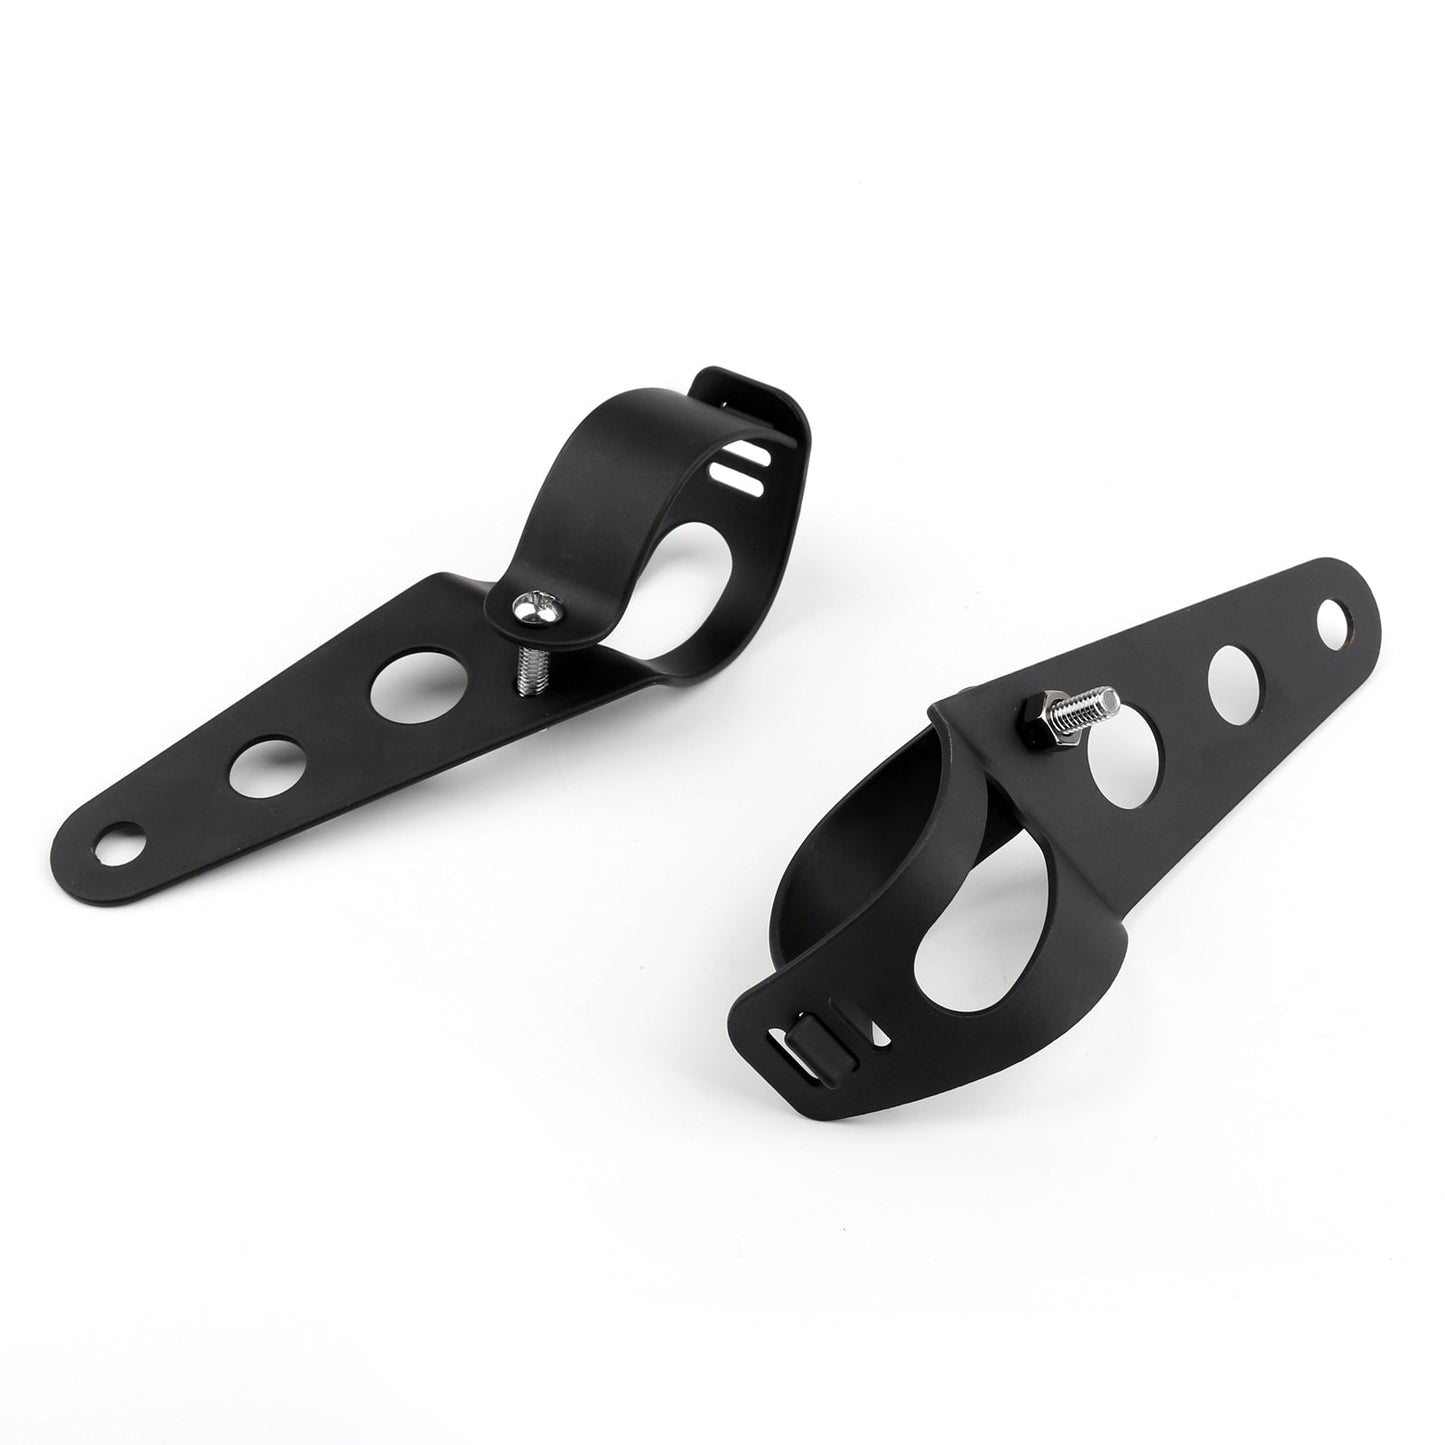 Universal Side Mount Headlight Brackets Fit Motorcycles With 34-46mm Fork Tubes